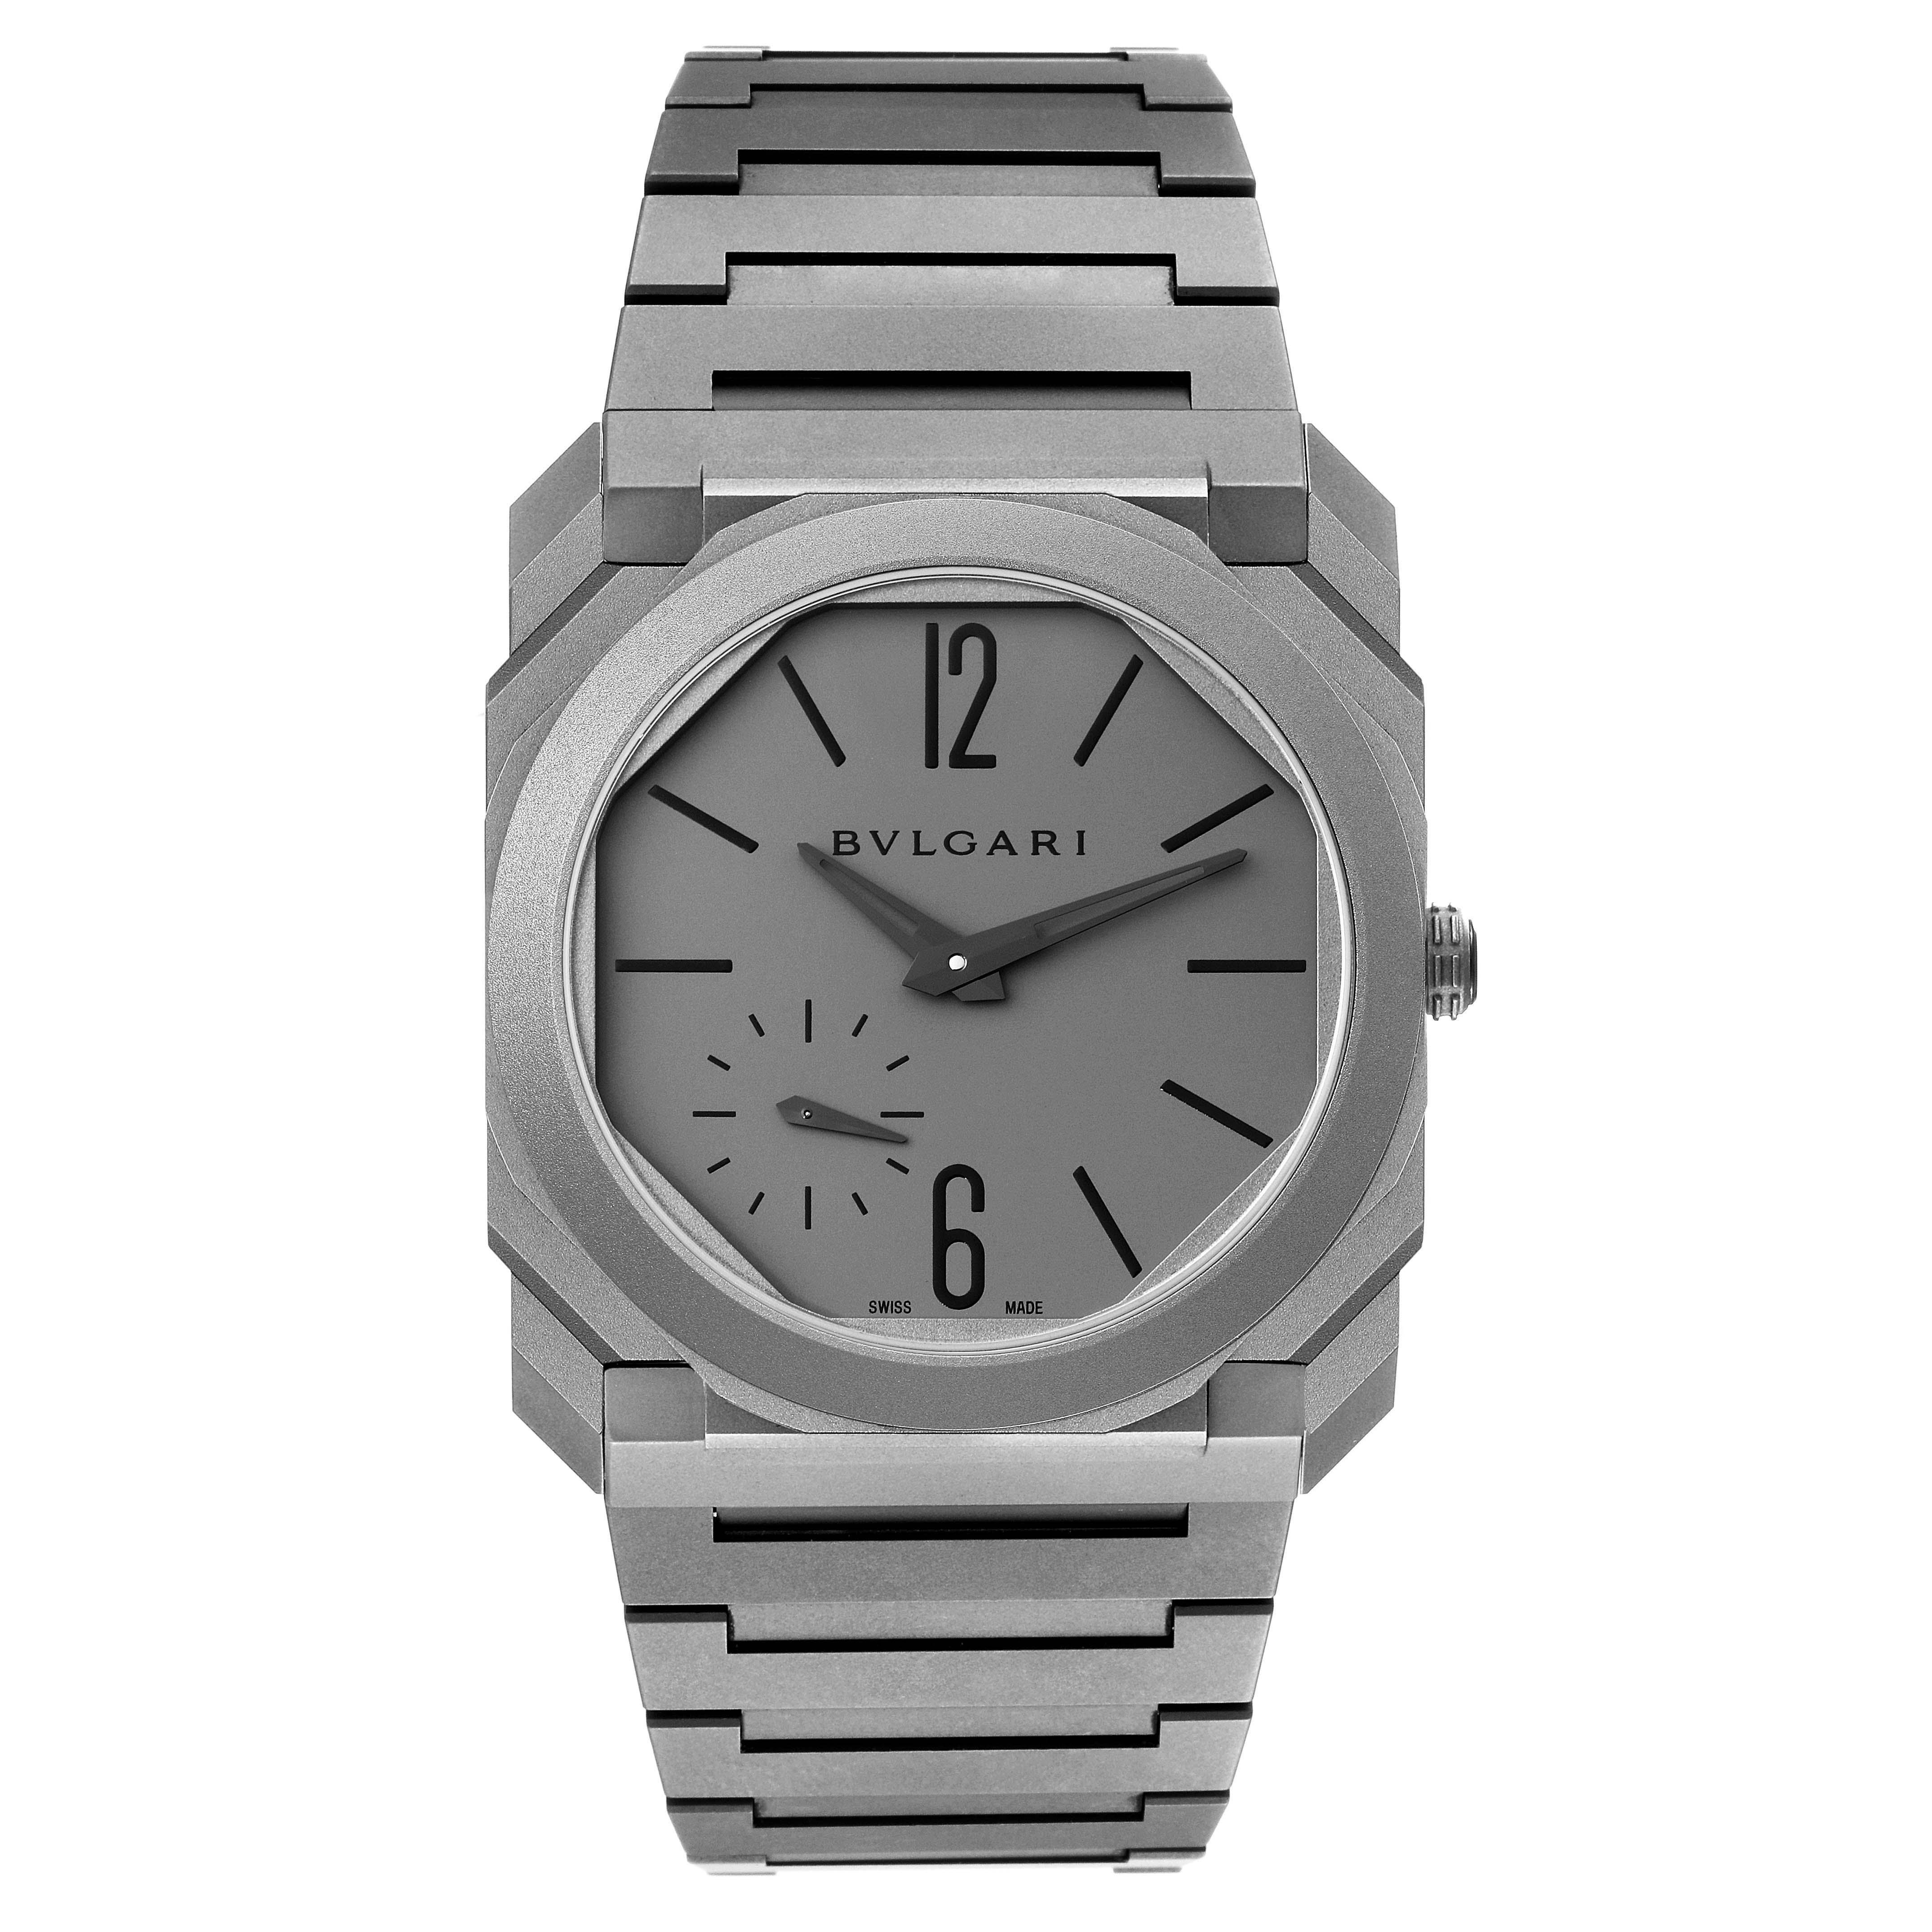 Bvlgari Octo Finissimo Titanium Ultra Thin Mens Watch 102713 Box Papers. Automatic self-winding movement. The movement is only 2.35mm thick. Titanium square case 40.0 mm x 40mm. Exhibition sapphire crystal case back. Cathe thickness 5.15 mm.